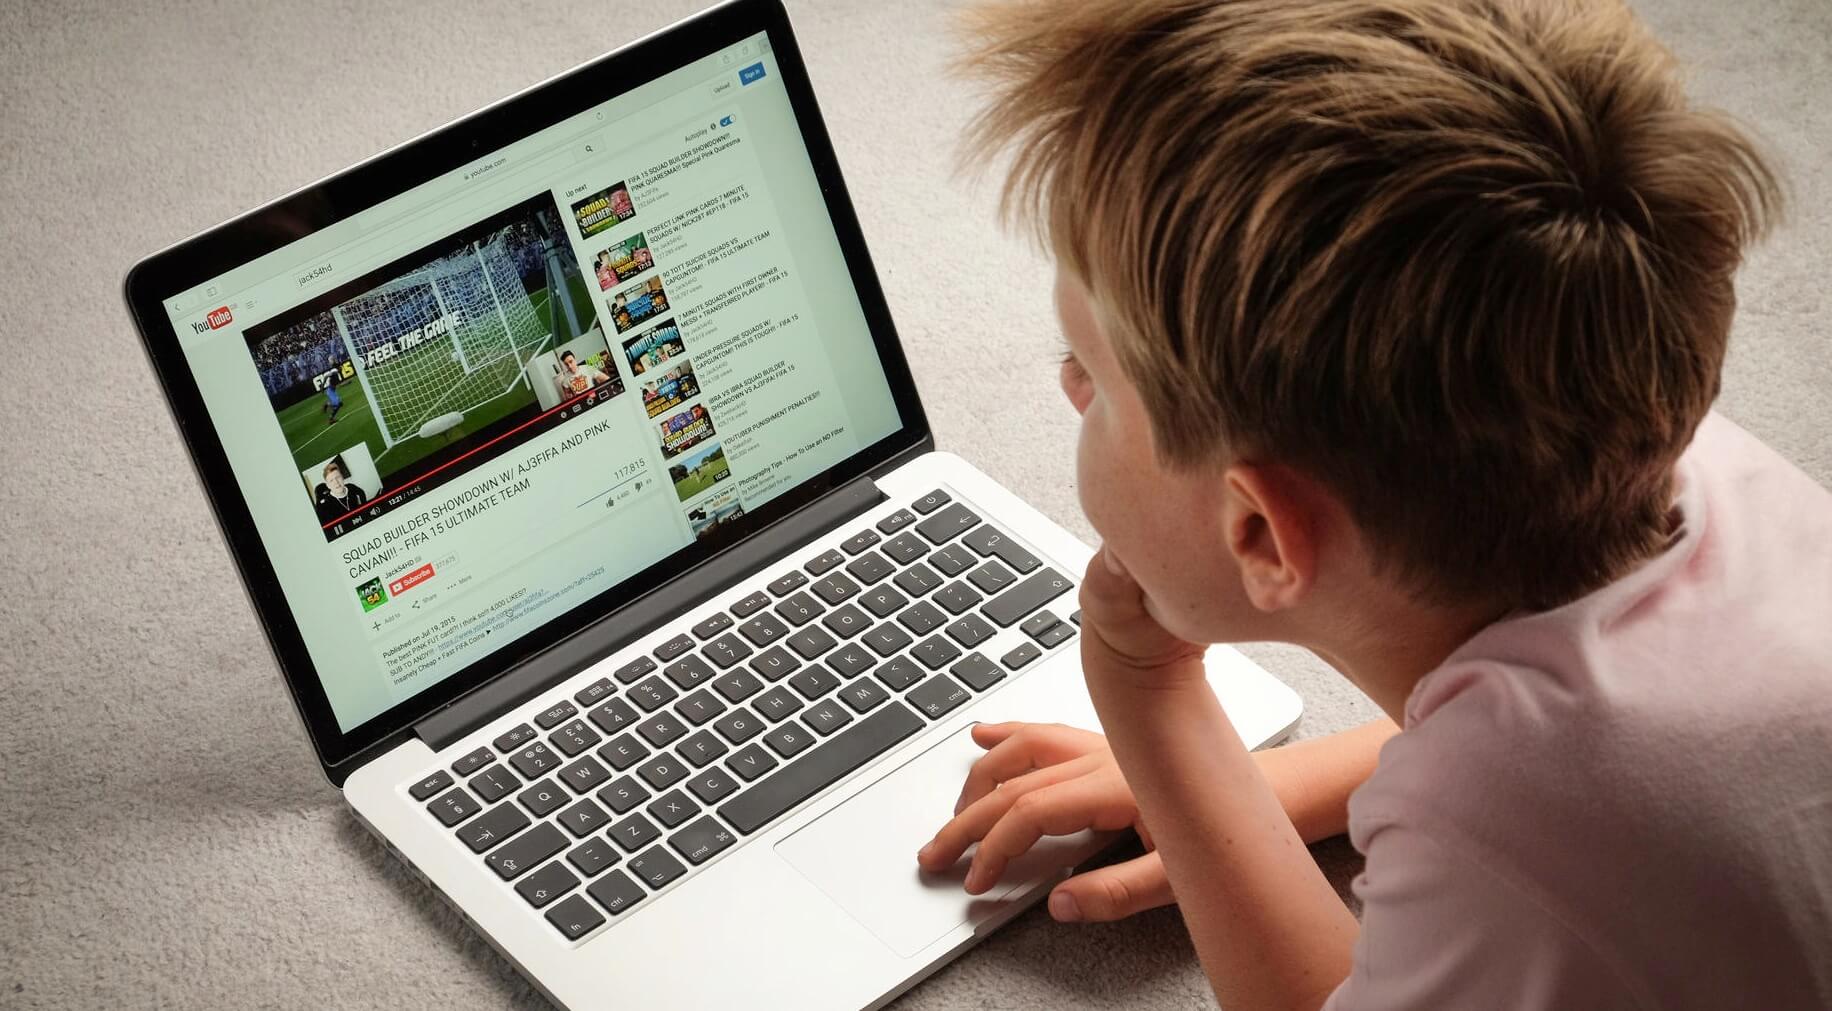 YouTube rolls out new controls aimed at controlling children's content